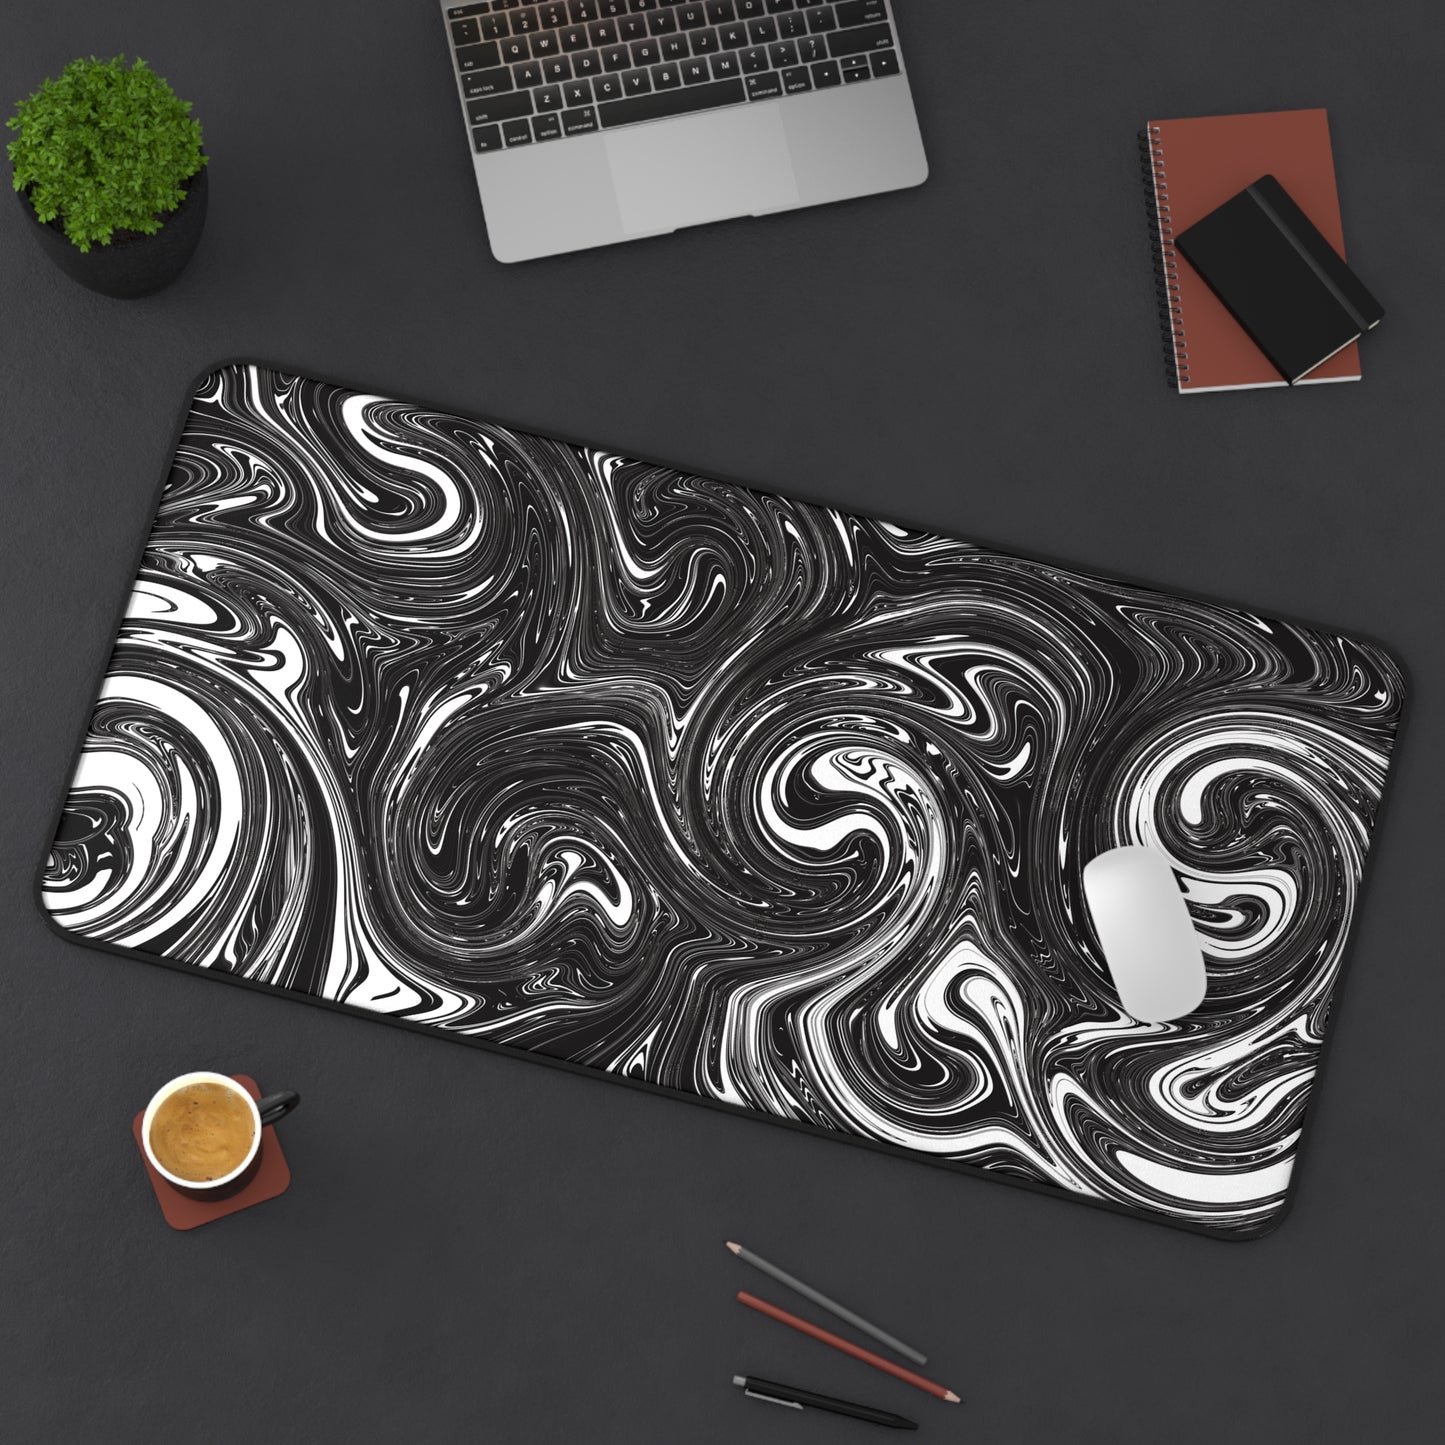 A 31" x 15.5" desk mat with black and white swirls sitting at an angle.